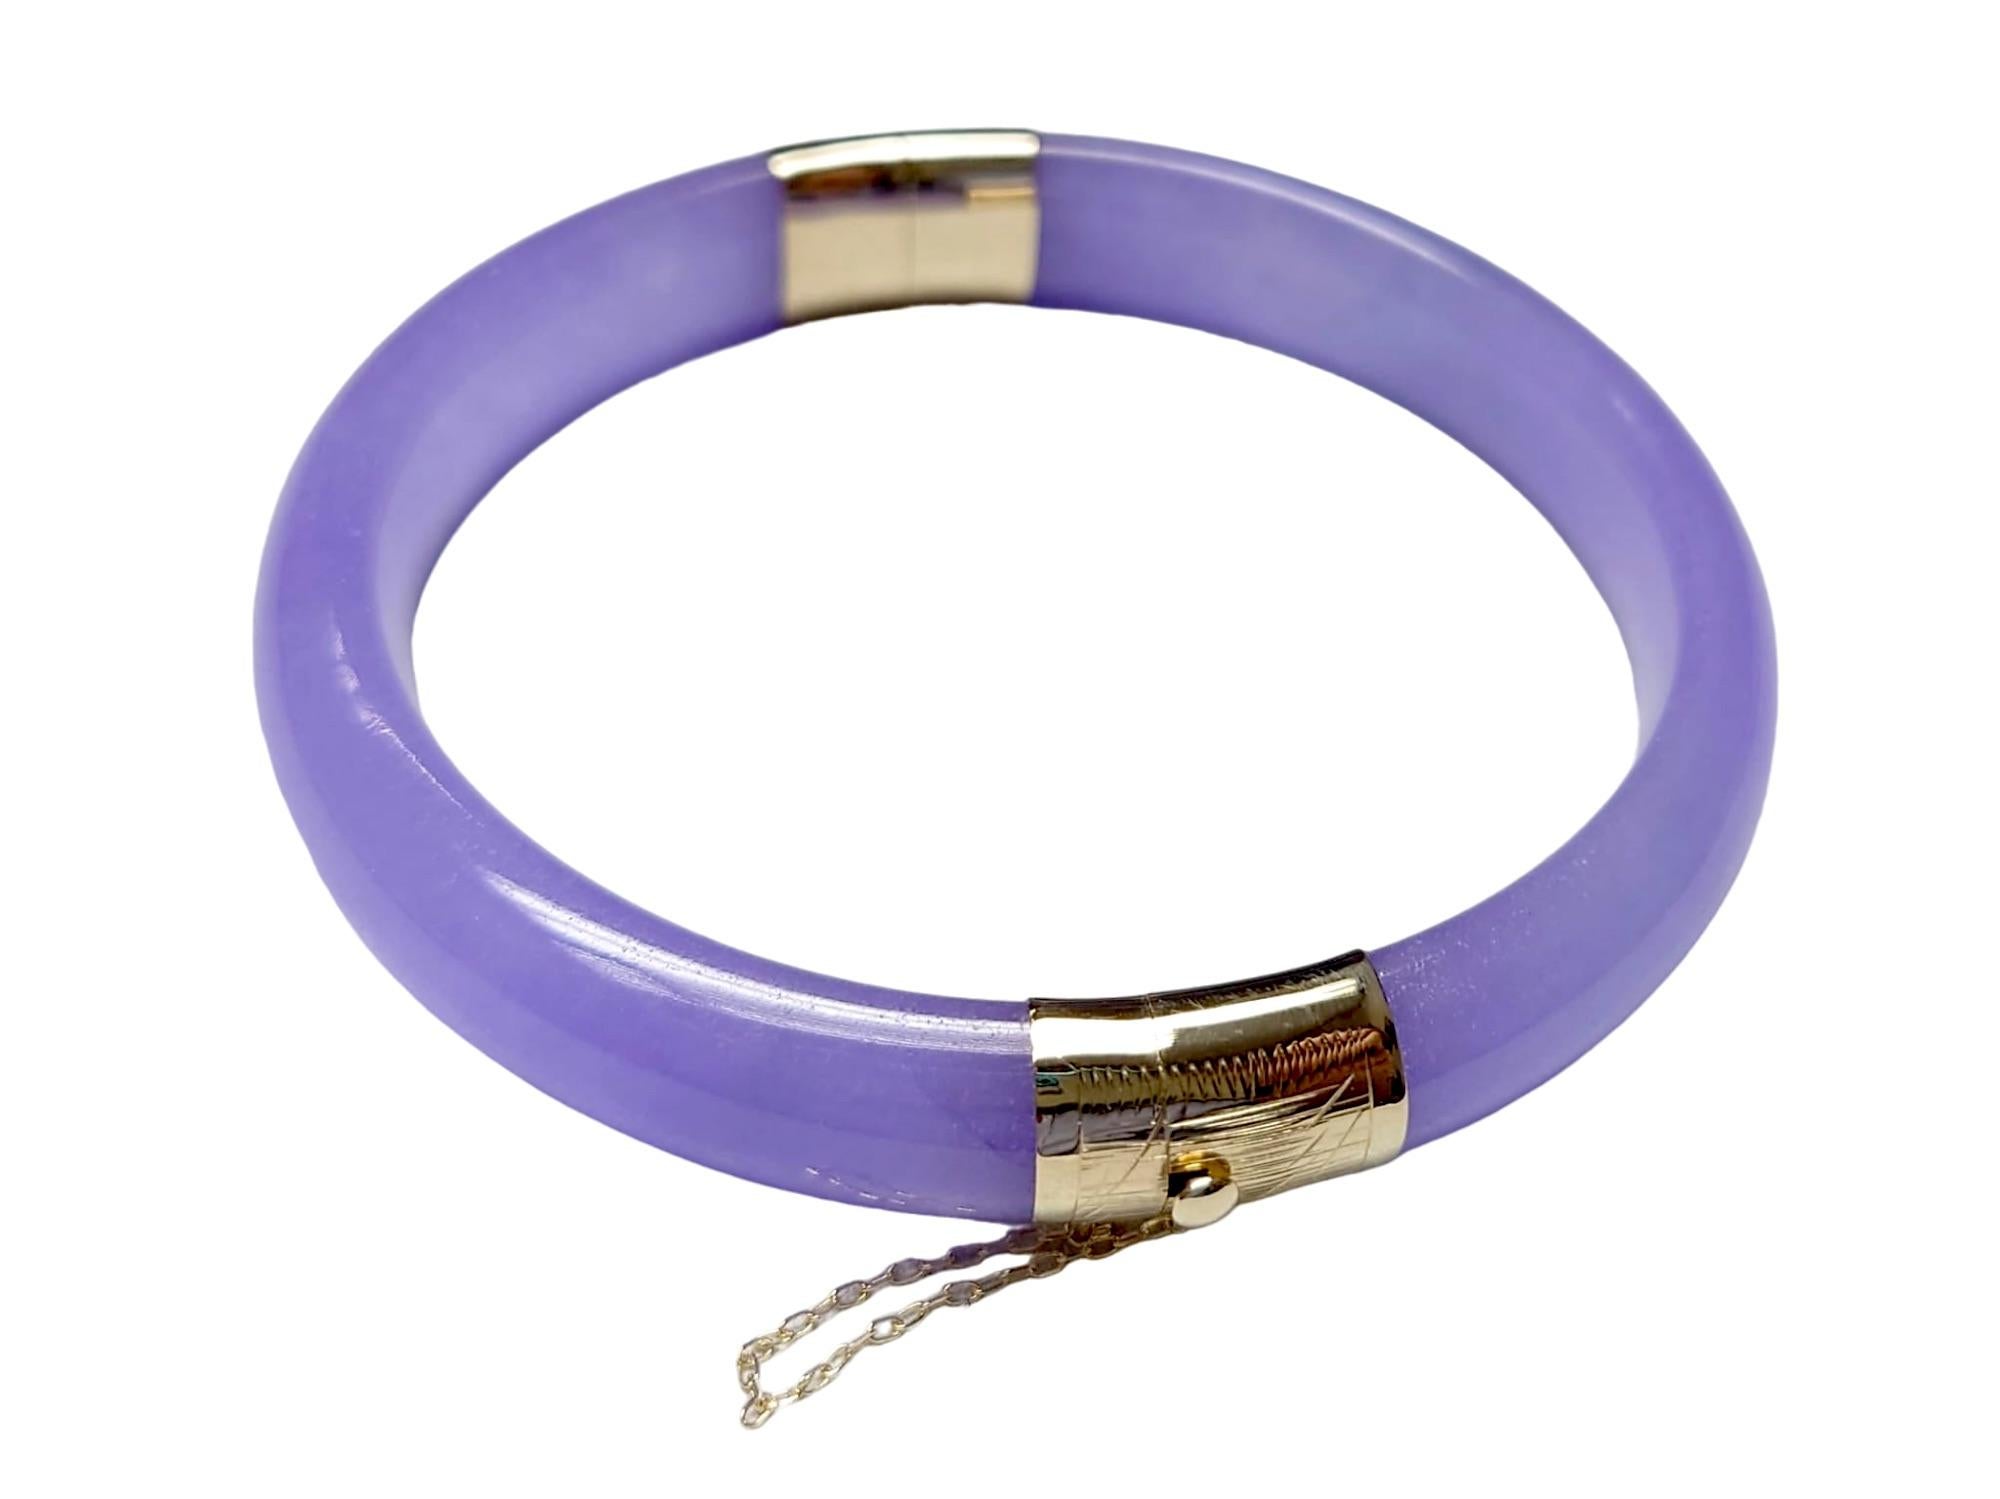 Viceroy's Circular Lavender Jade Bangle Bracelet (with 14K Yellow Gold) For Sale 7